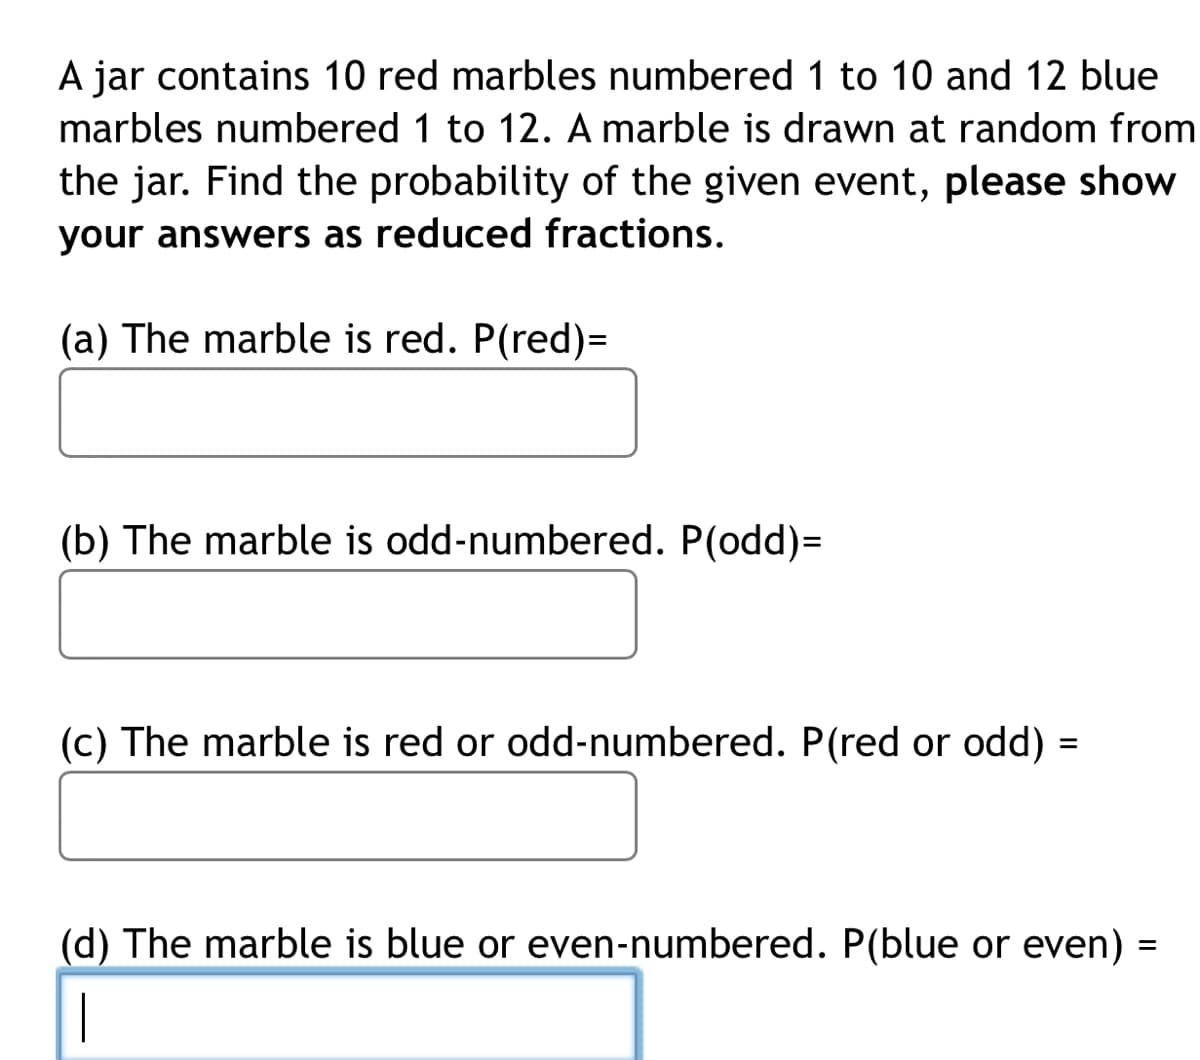 A jar contains 10 red marbles numbered 1 to 10 and 12 blue
marbles numbered 1 to 12. A marble is drawn at random from
the jar. Find the probability of the given event, please show
your answers as reduced fractions.
(a) The marble is red. P(red)=
(b) The marble is odd-numbered. P(odd)=
(c) The marble is red or odd-numbered. P(red or odd) =
(d) The marble is blue or even-numbered. P(blue or even)
=